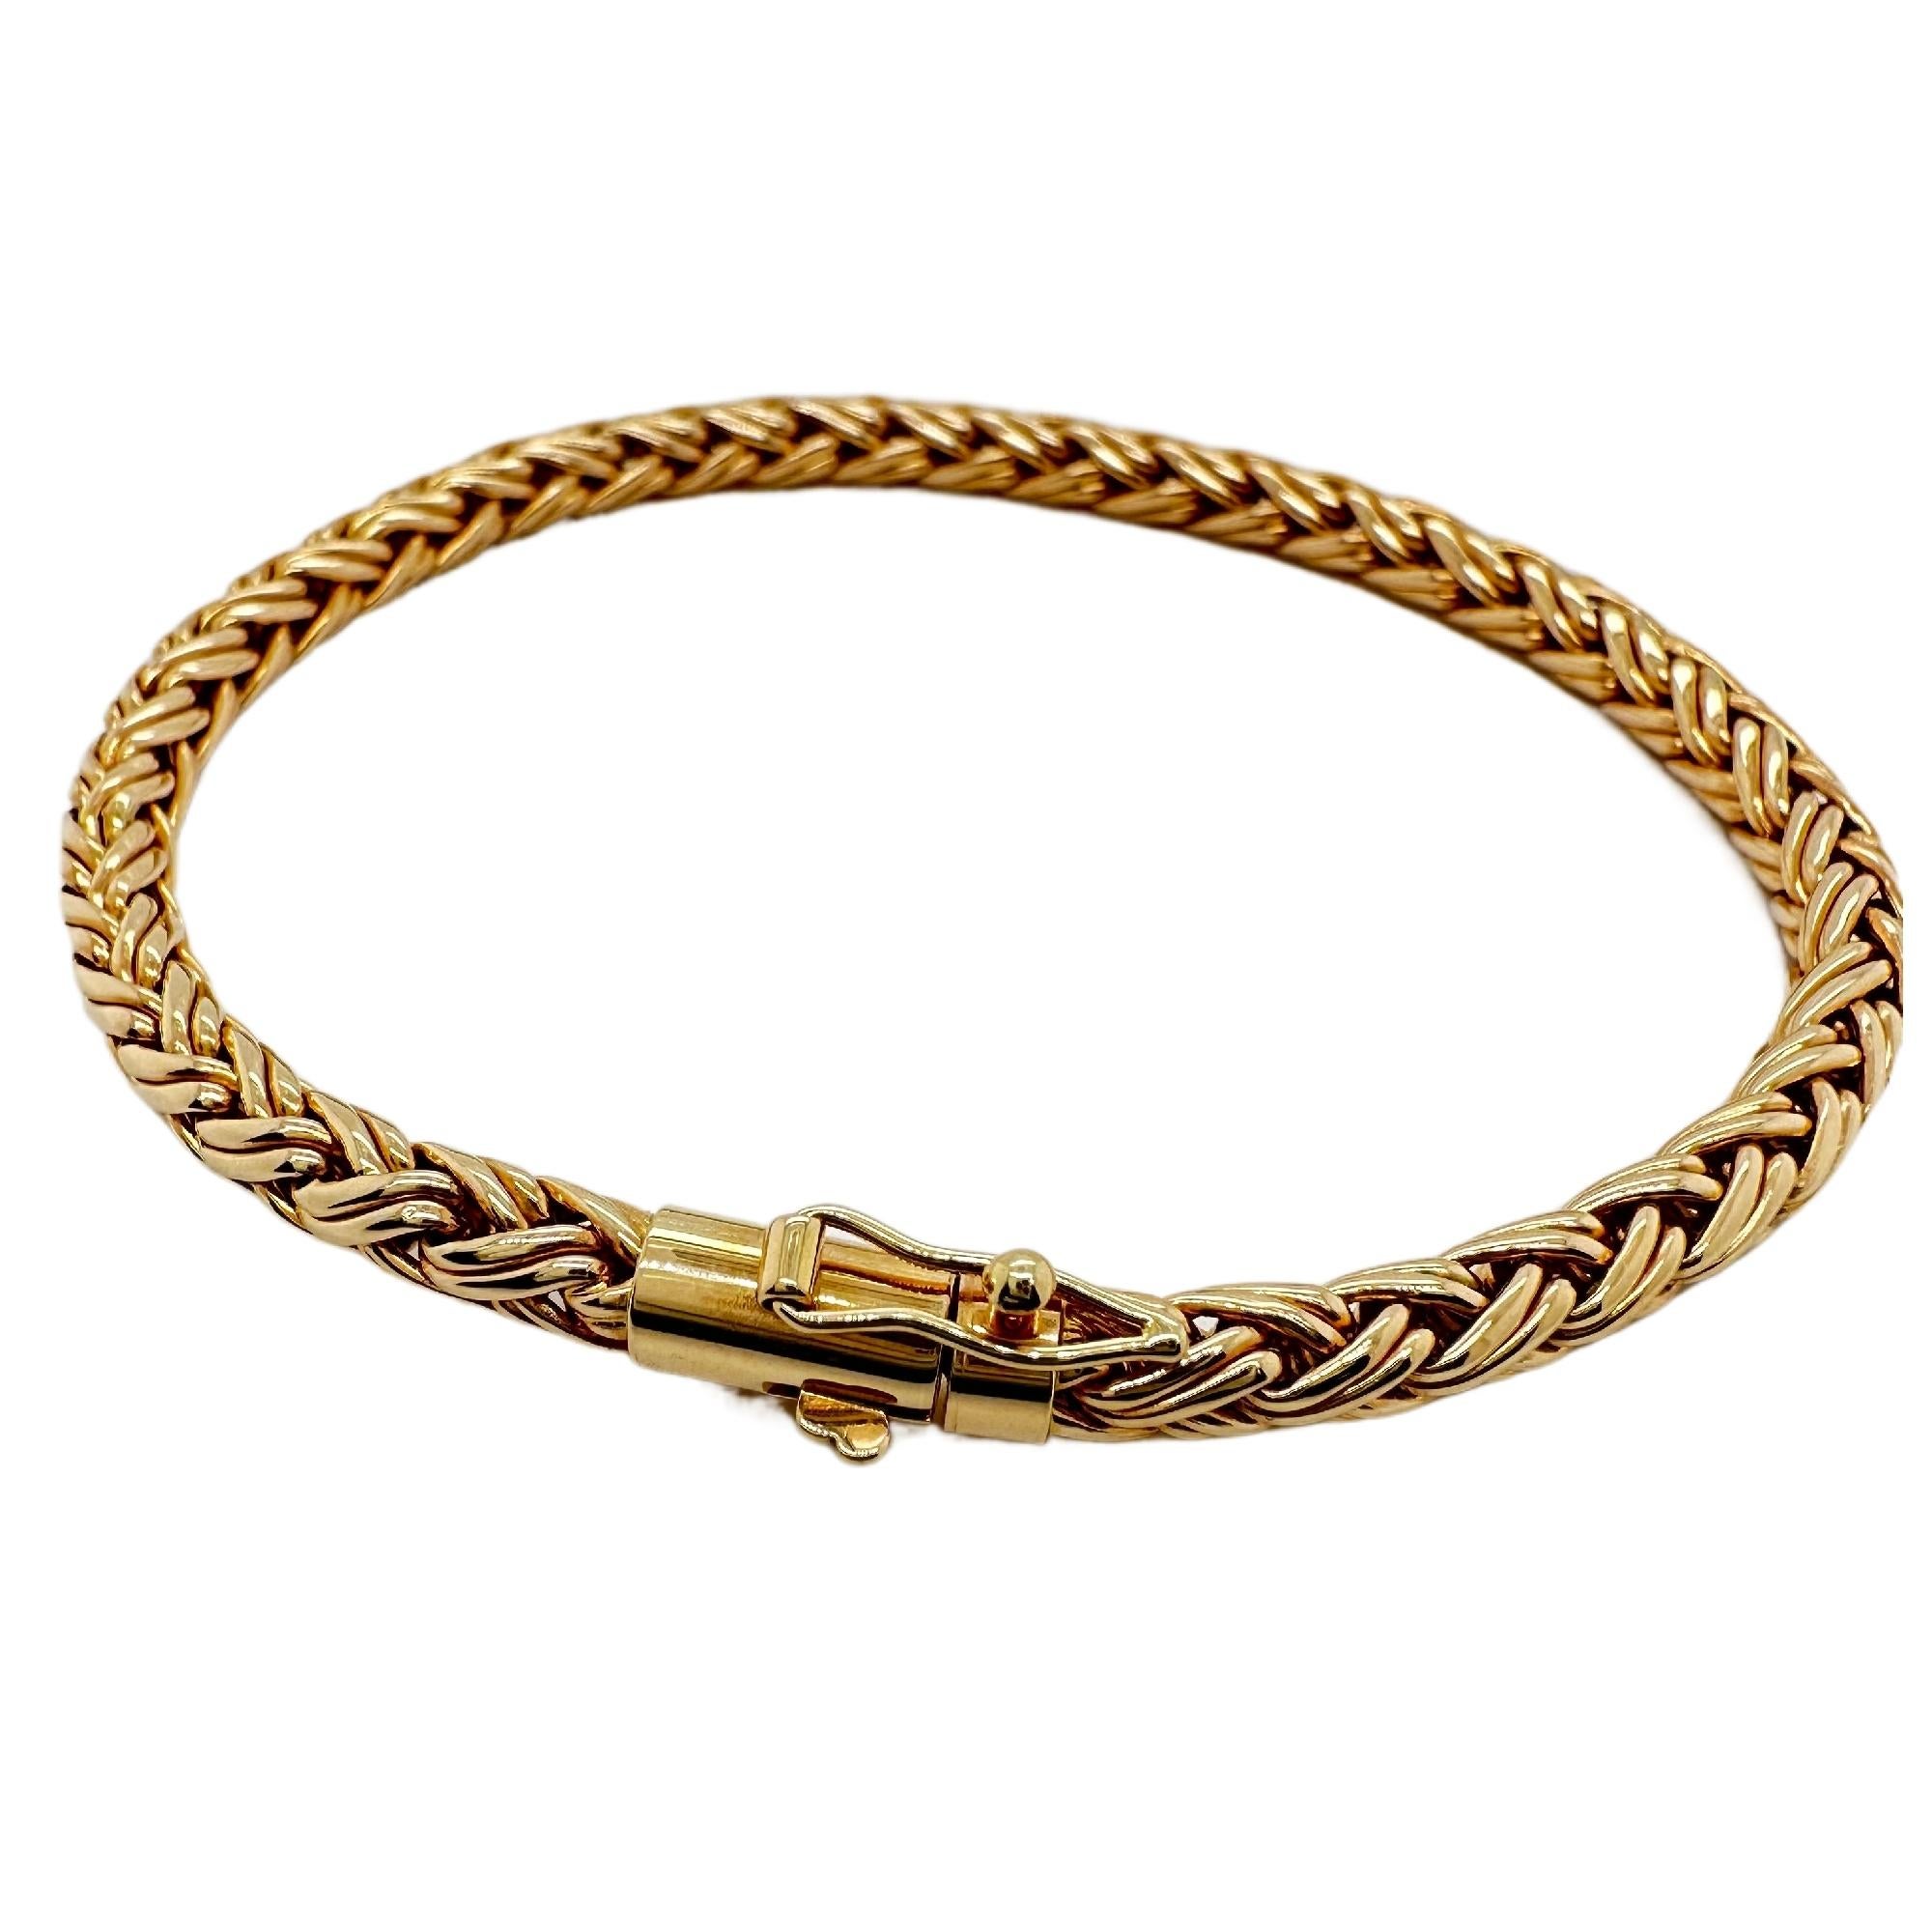 Tiffany & Co. Wheat Braided Rope Bracelet in 14k Yellow Gold For Sale 2